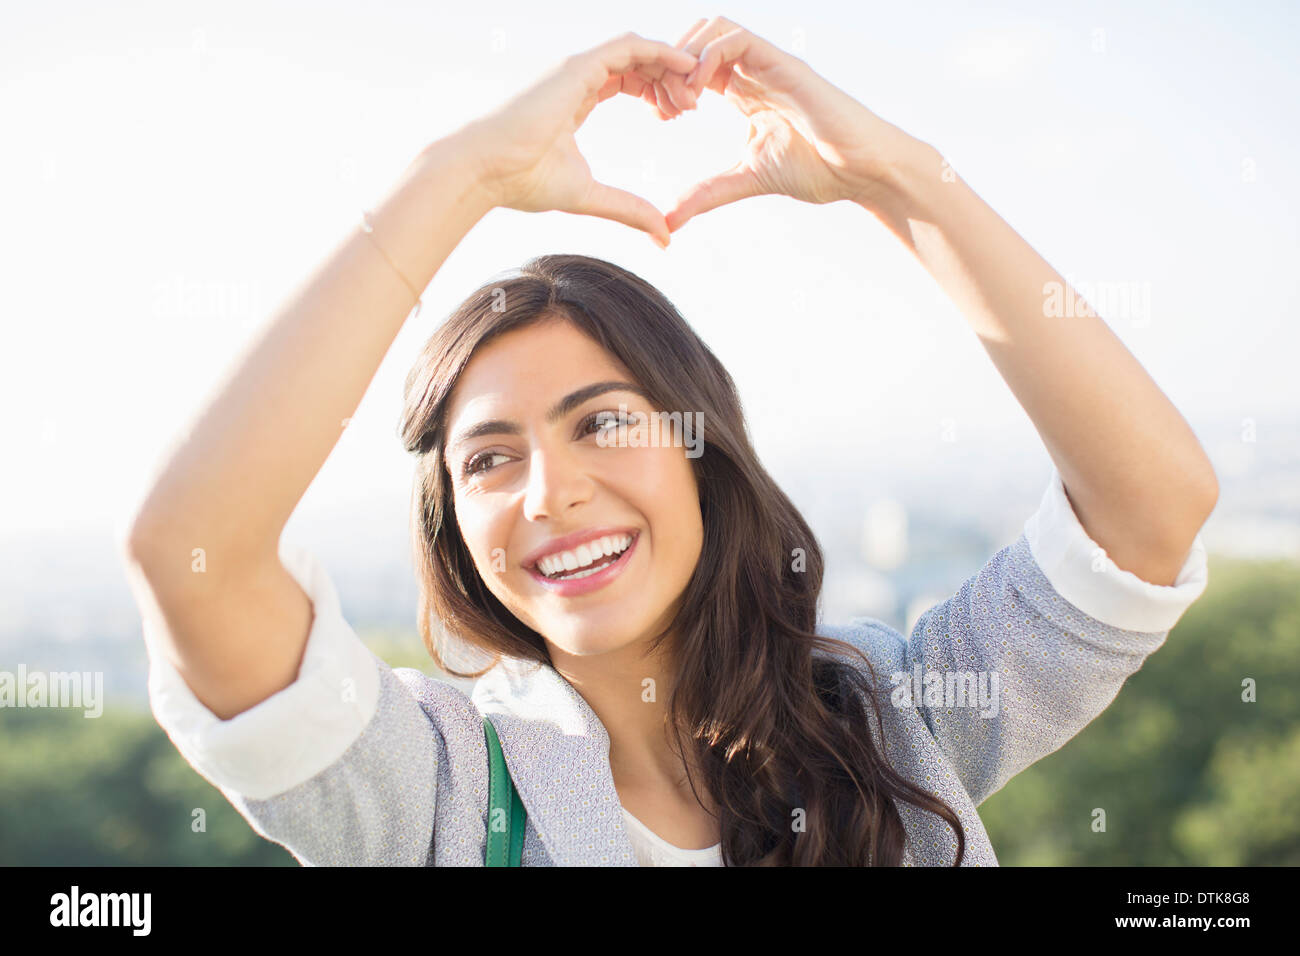 Woman making heart-shape with hands outdoors Stock Photo